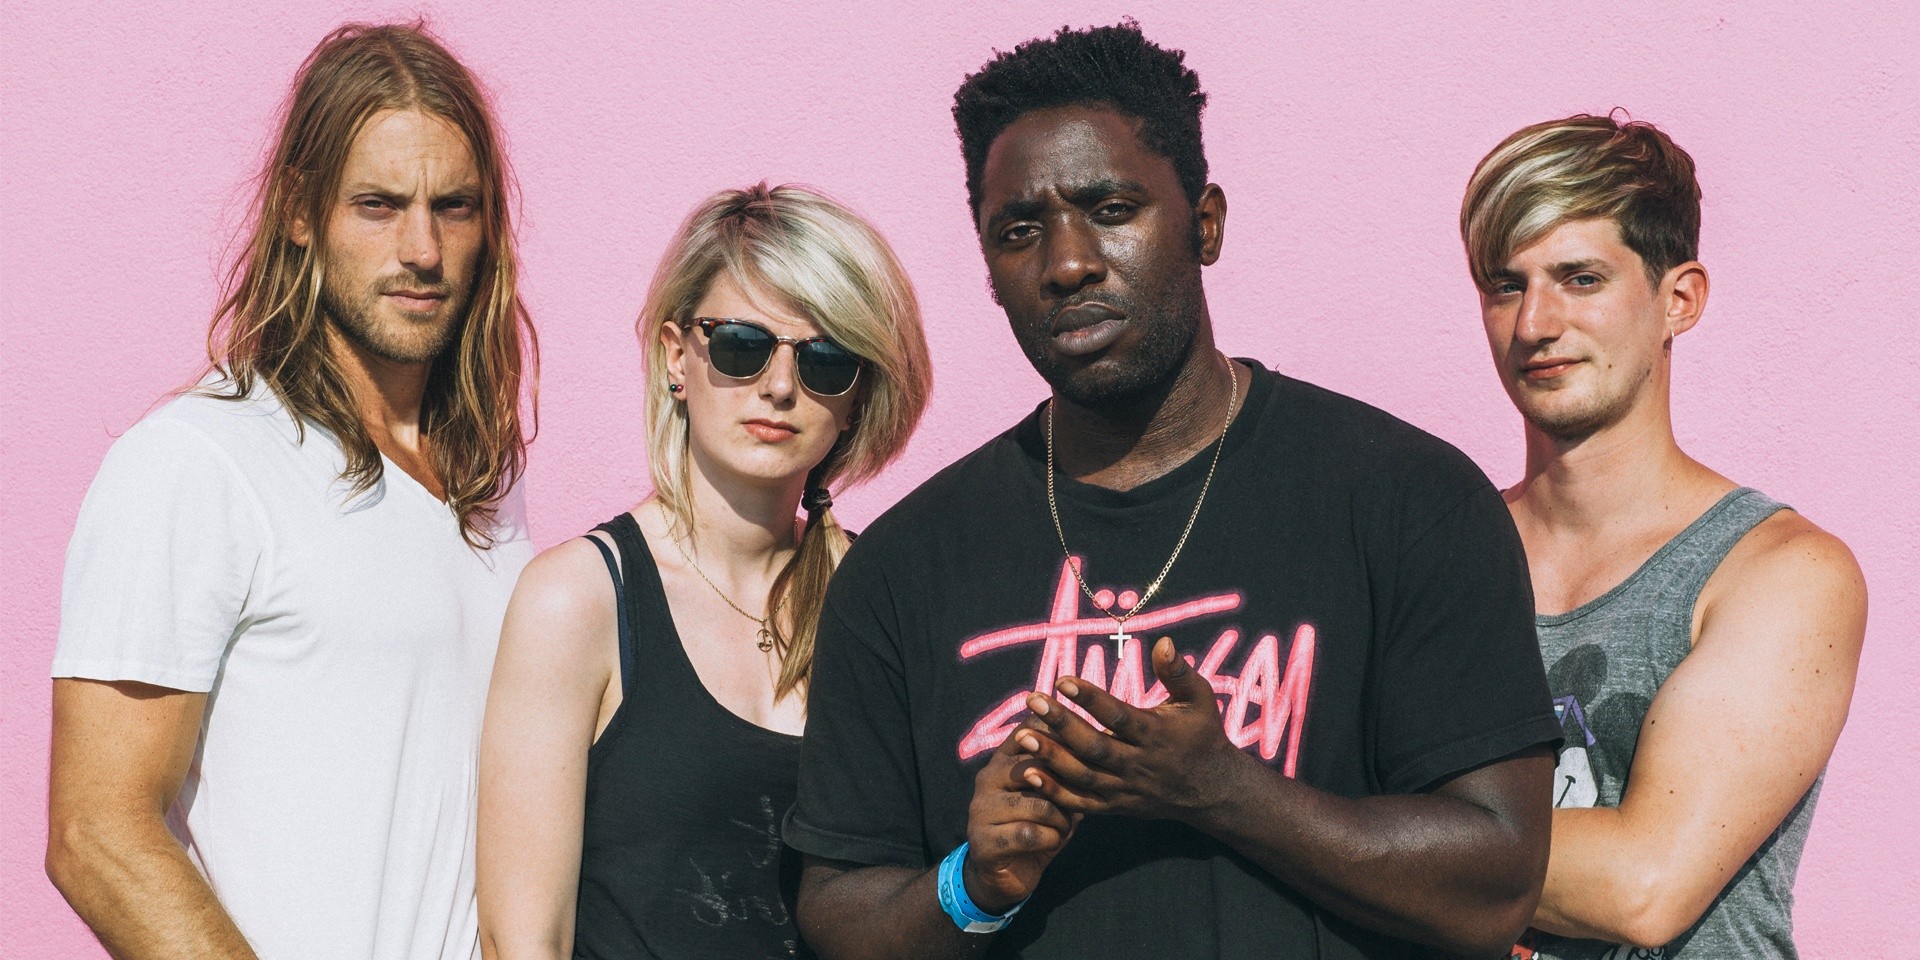 Bloc Party to tour Australia, playing Silent Alarm in full